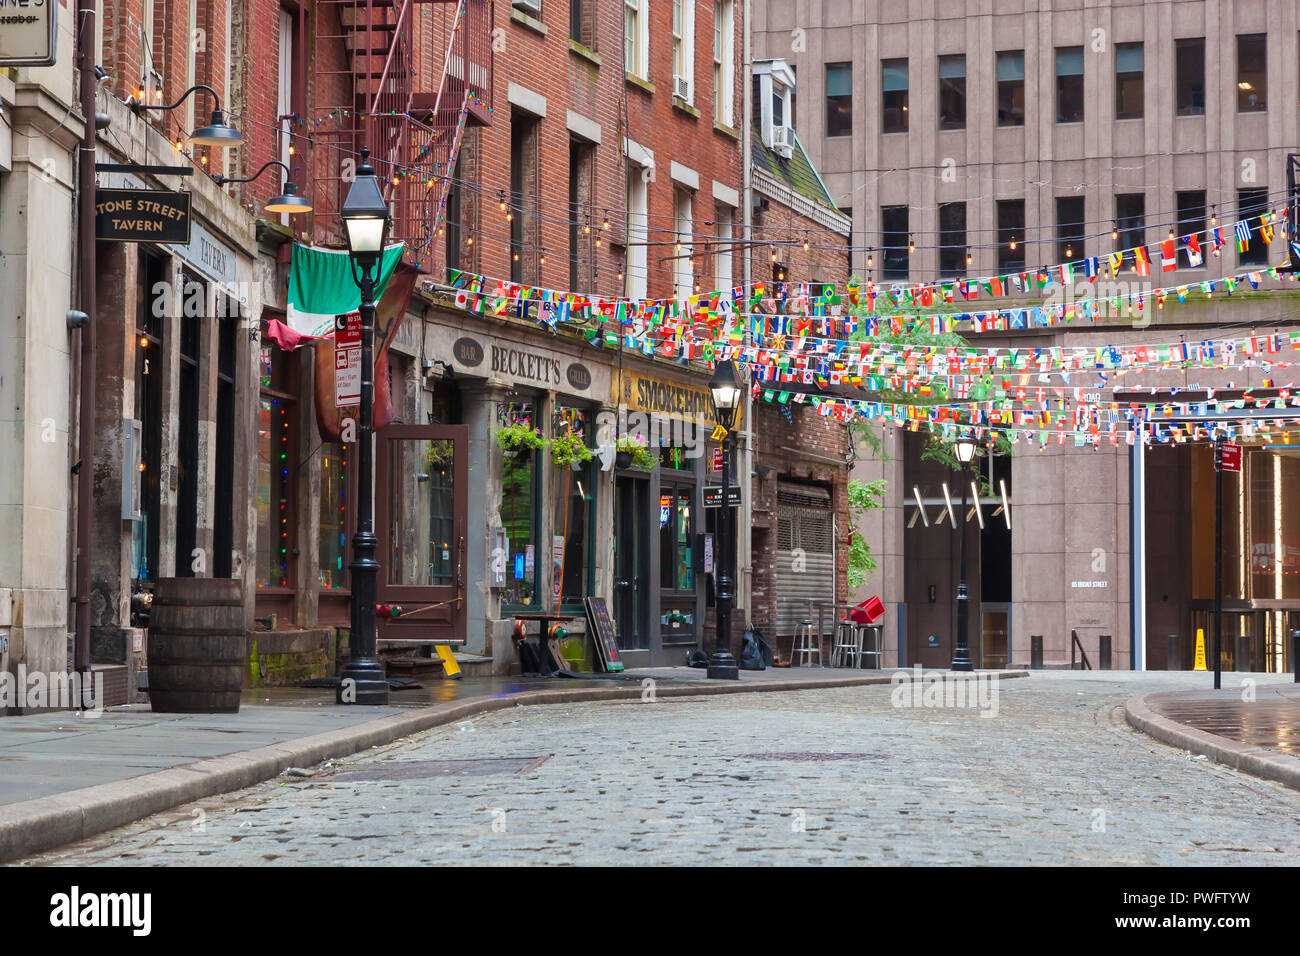 NEW YORK, NEW YORK - August 19, 2018: A view of an empty Stone Street in Lower Manhattan, with it's many restaurants and pubs Stock Photo